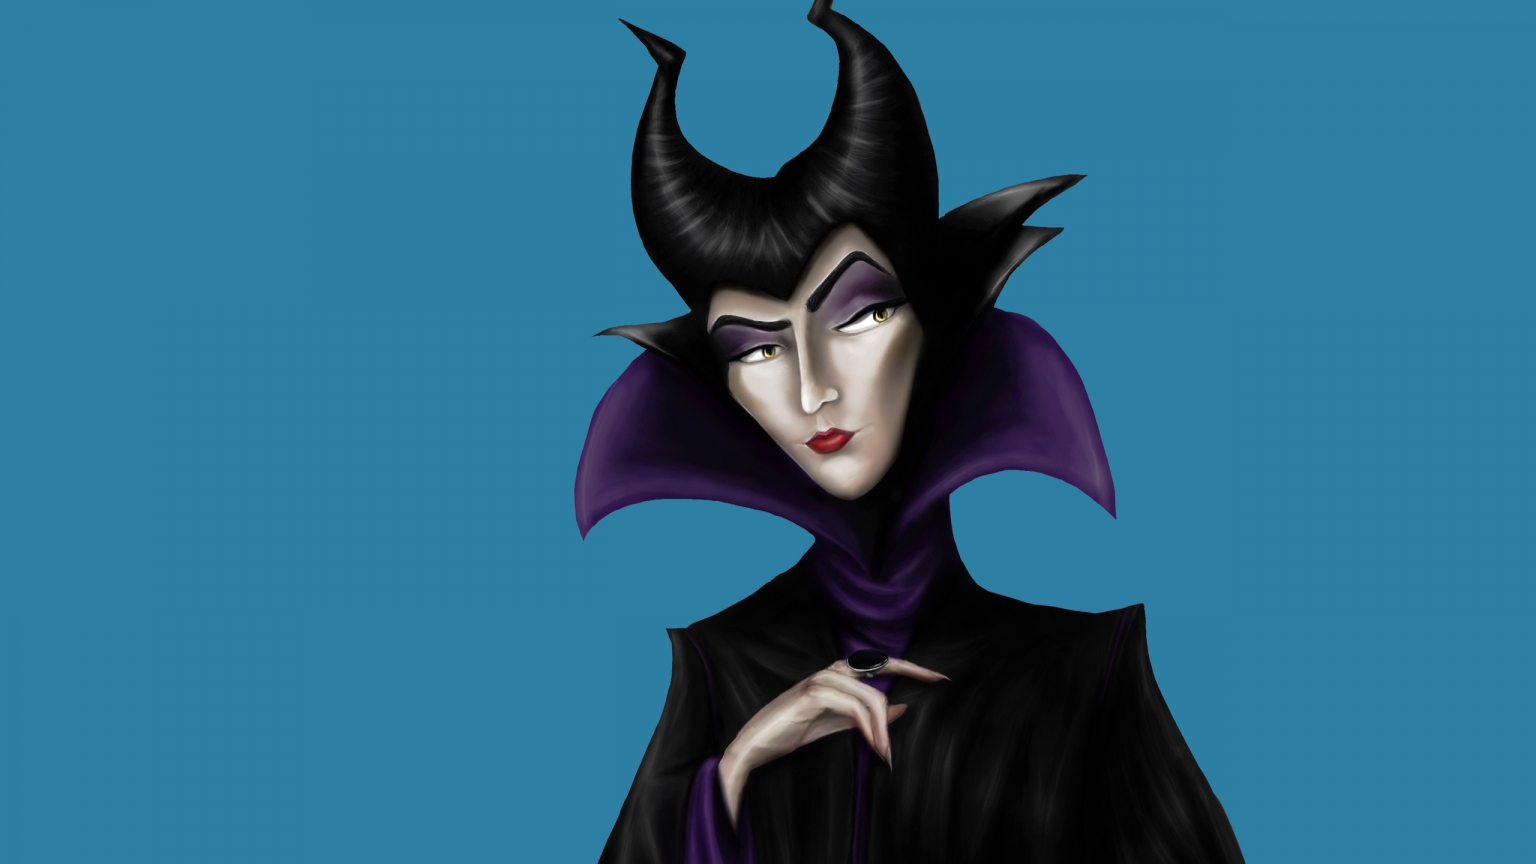 Maleficent Drawing for 1536 x 864 HDTV resolution